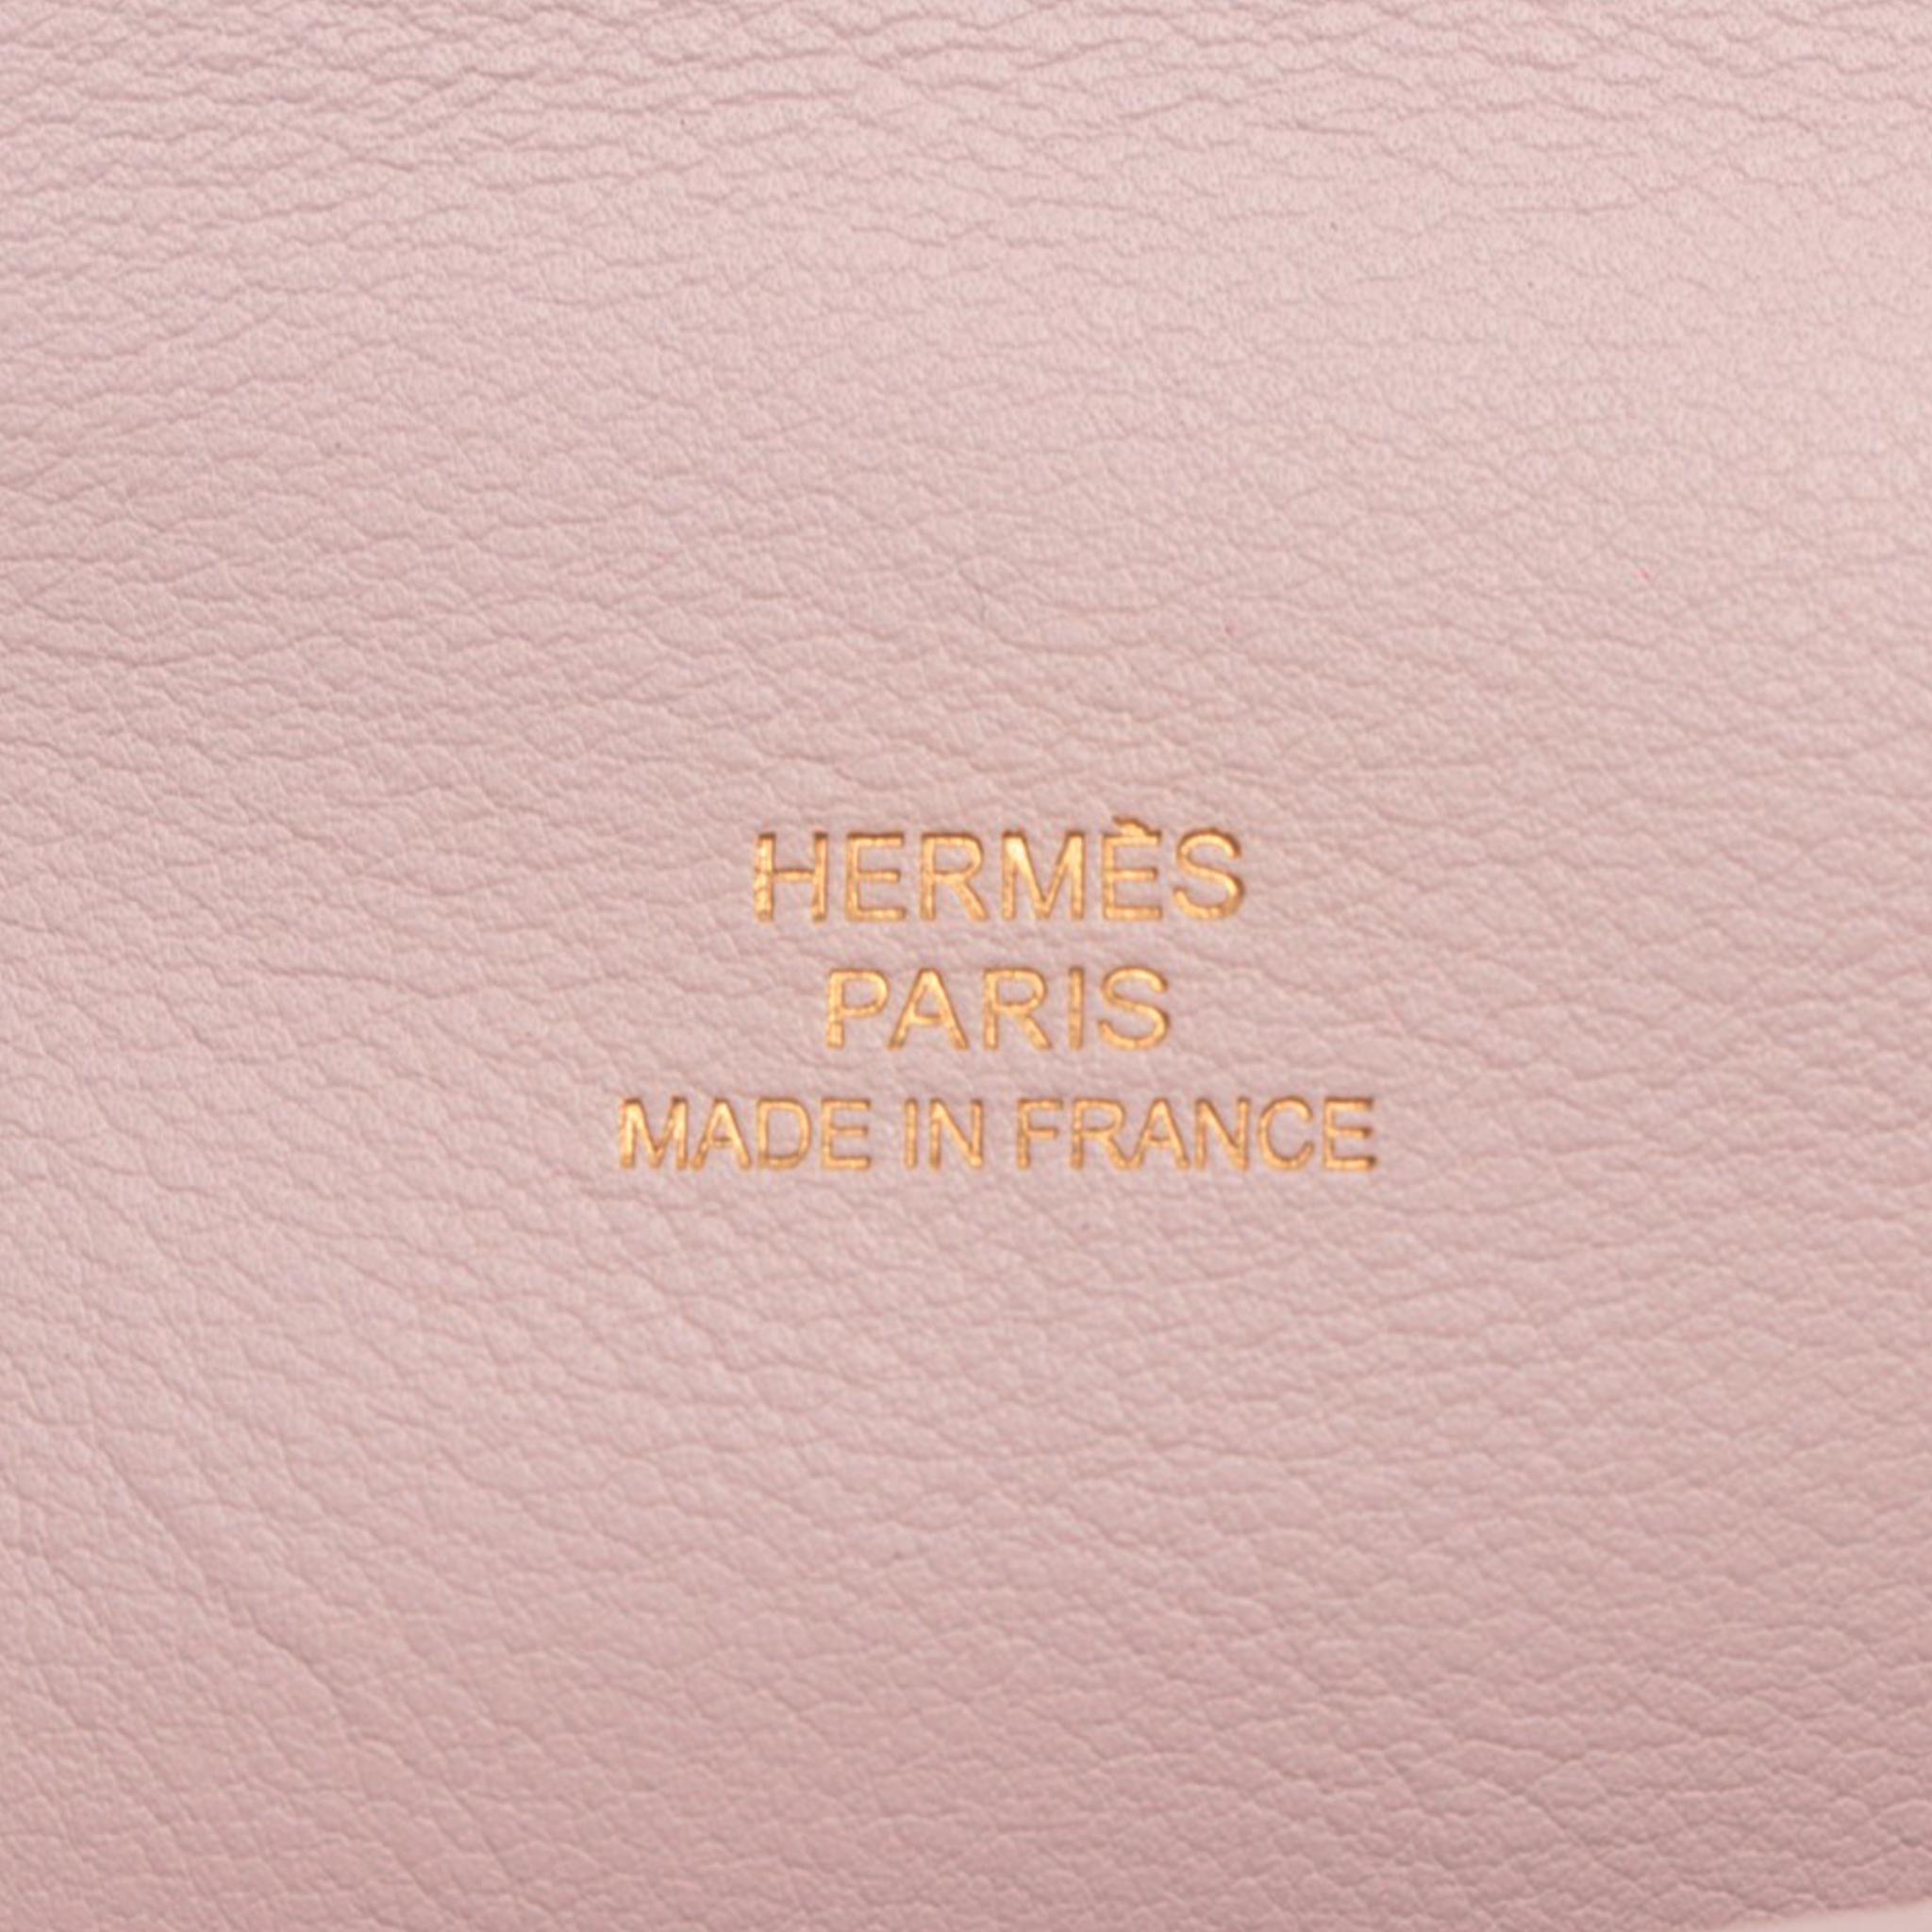 1stdibs Exclusives From Three Over Six

Brand: Hermès 
Style: Kelly Pochette
Size:  22 L x 13 H x 7 D cm
Color: Rose Dragee
Leather: Swift
Hardware: Gold
Stamp: L 2008

Condition: 
Vintage excellent: This item is vintage and shows natural signs of